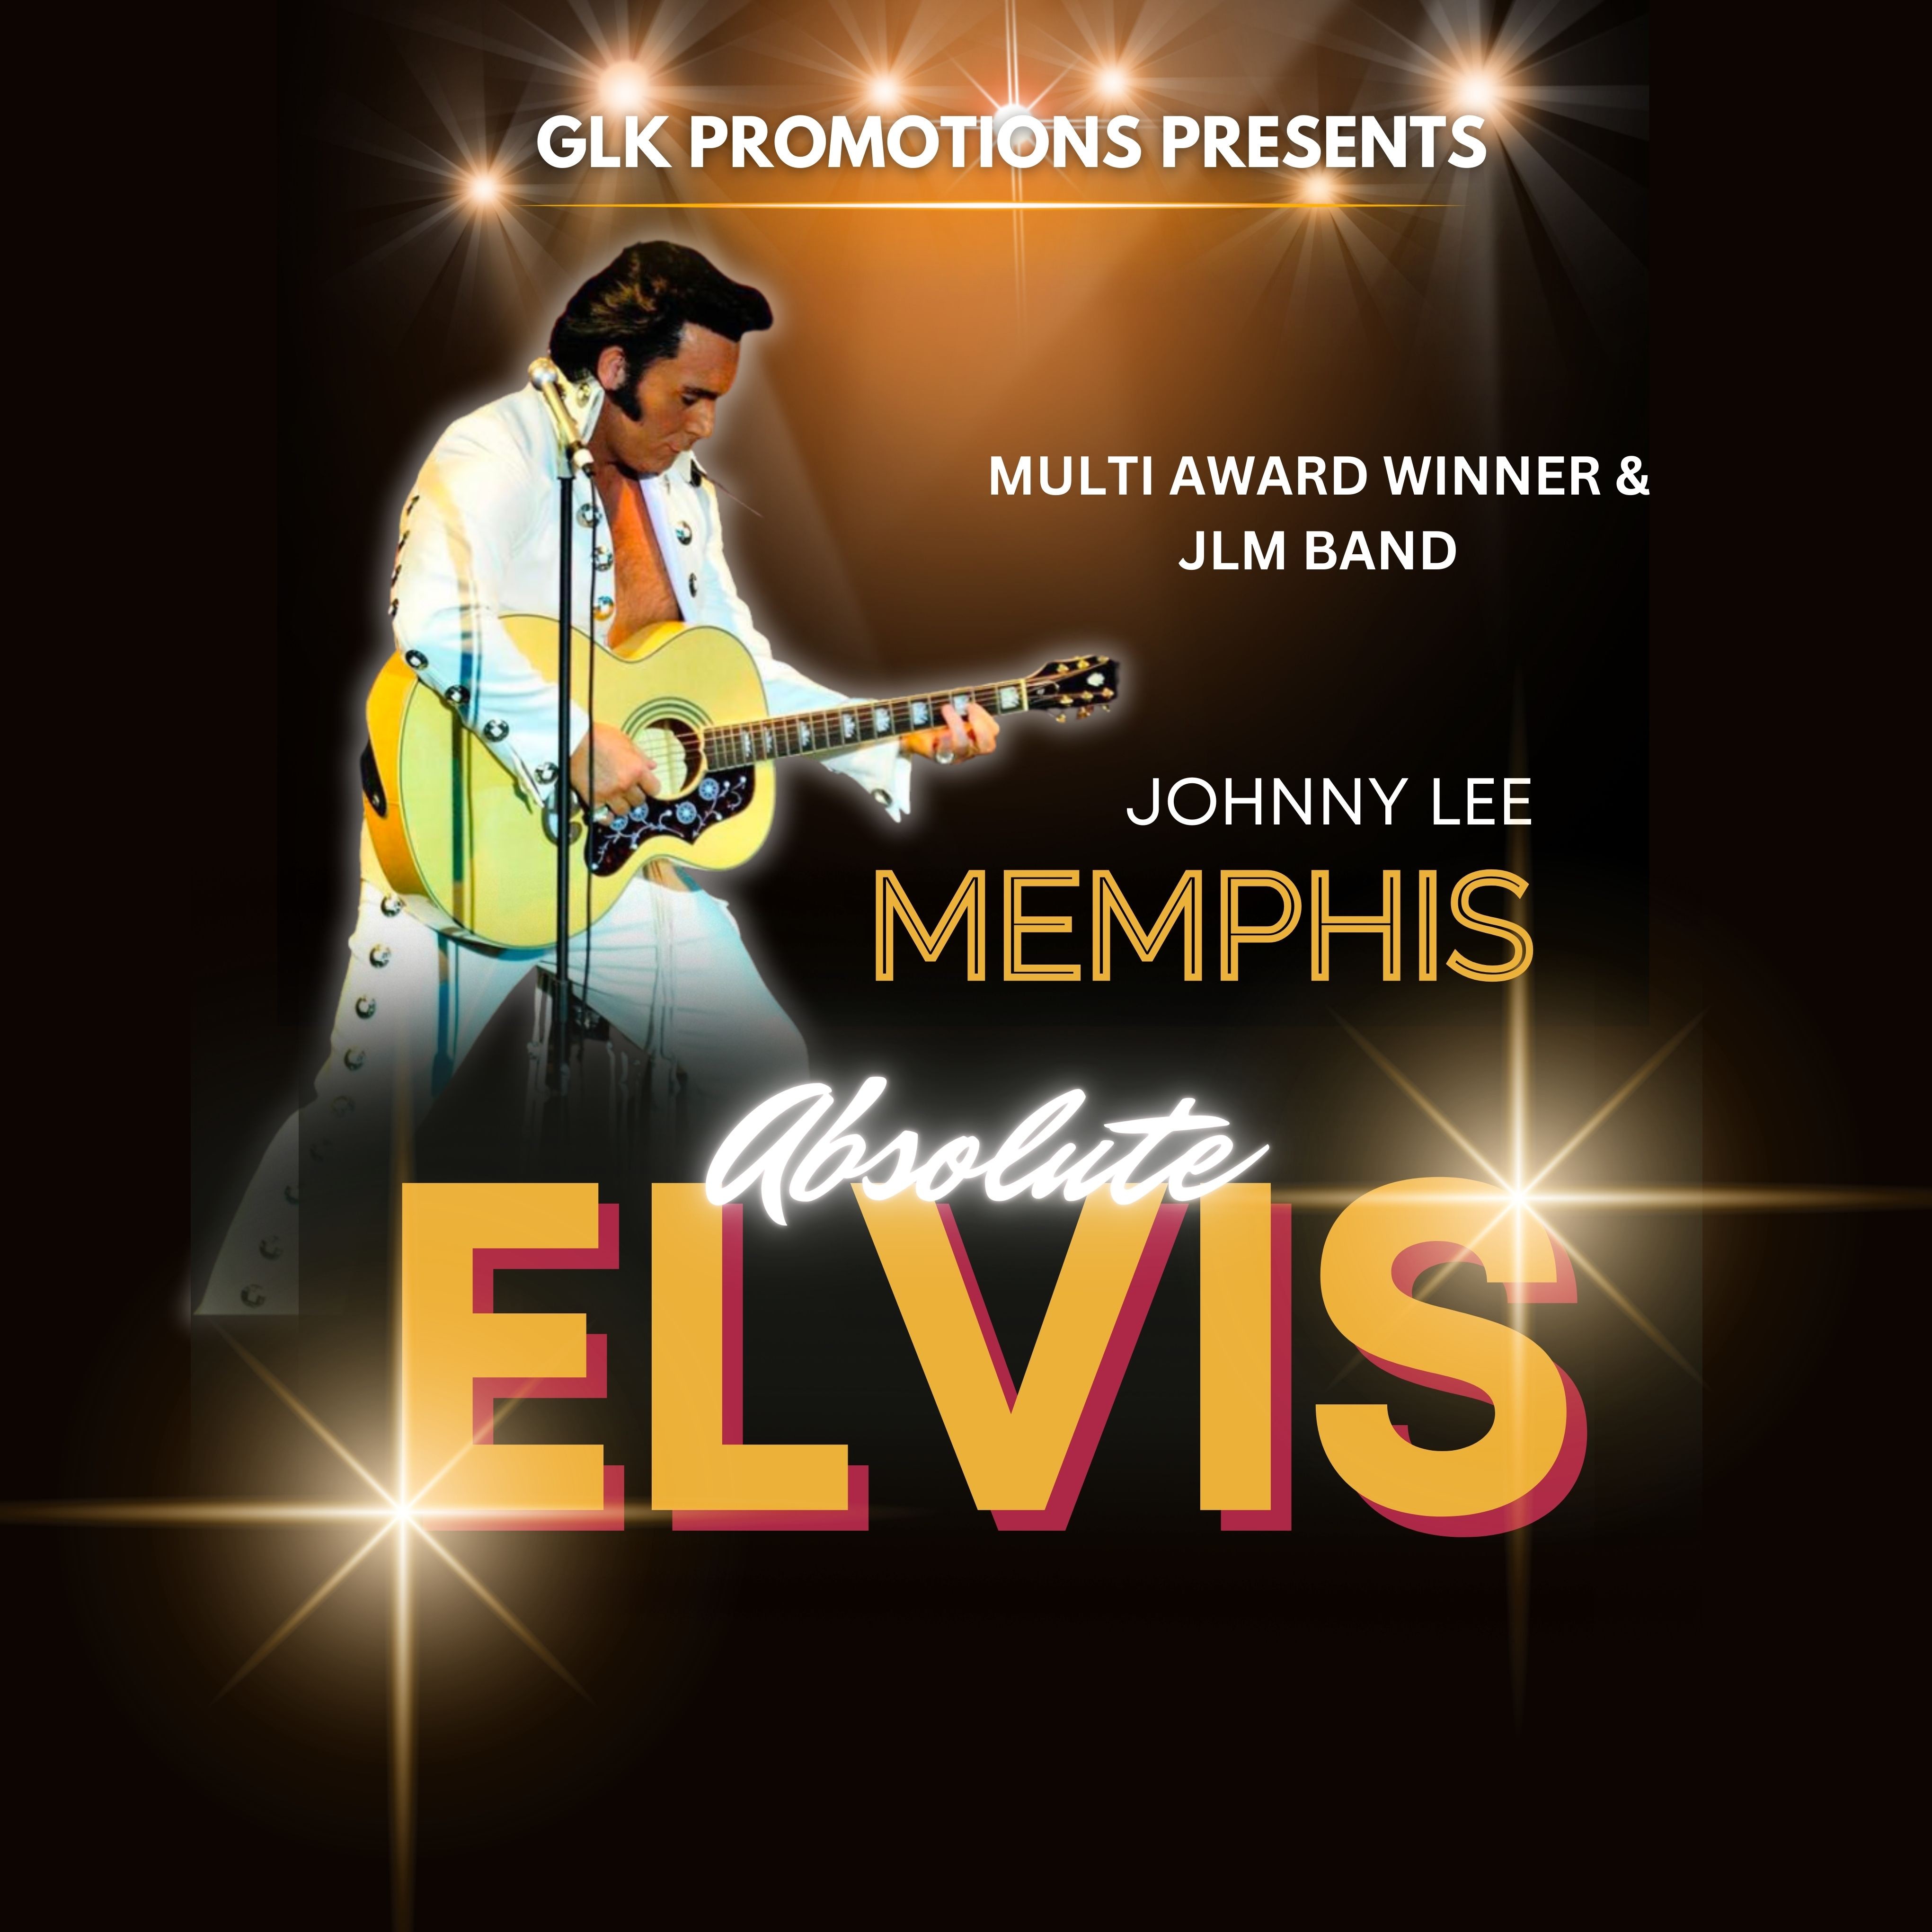 THE ABSOLUTE ELVIS SHOW